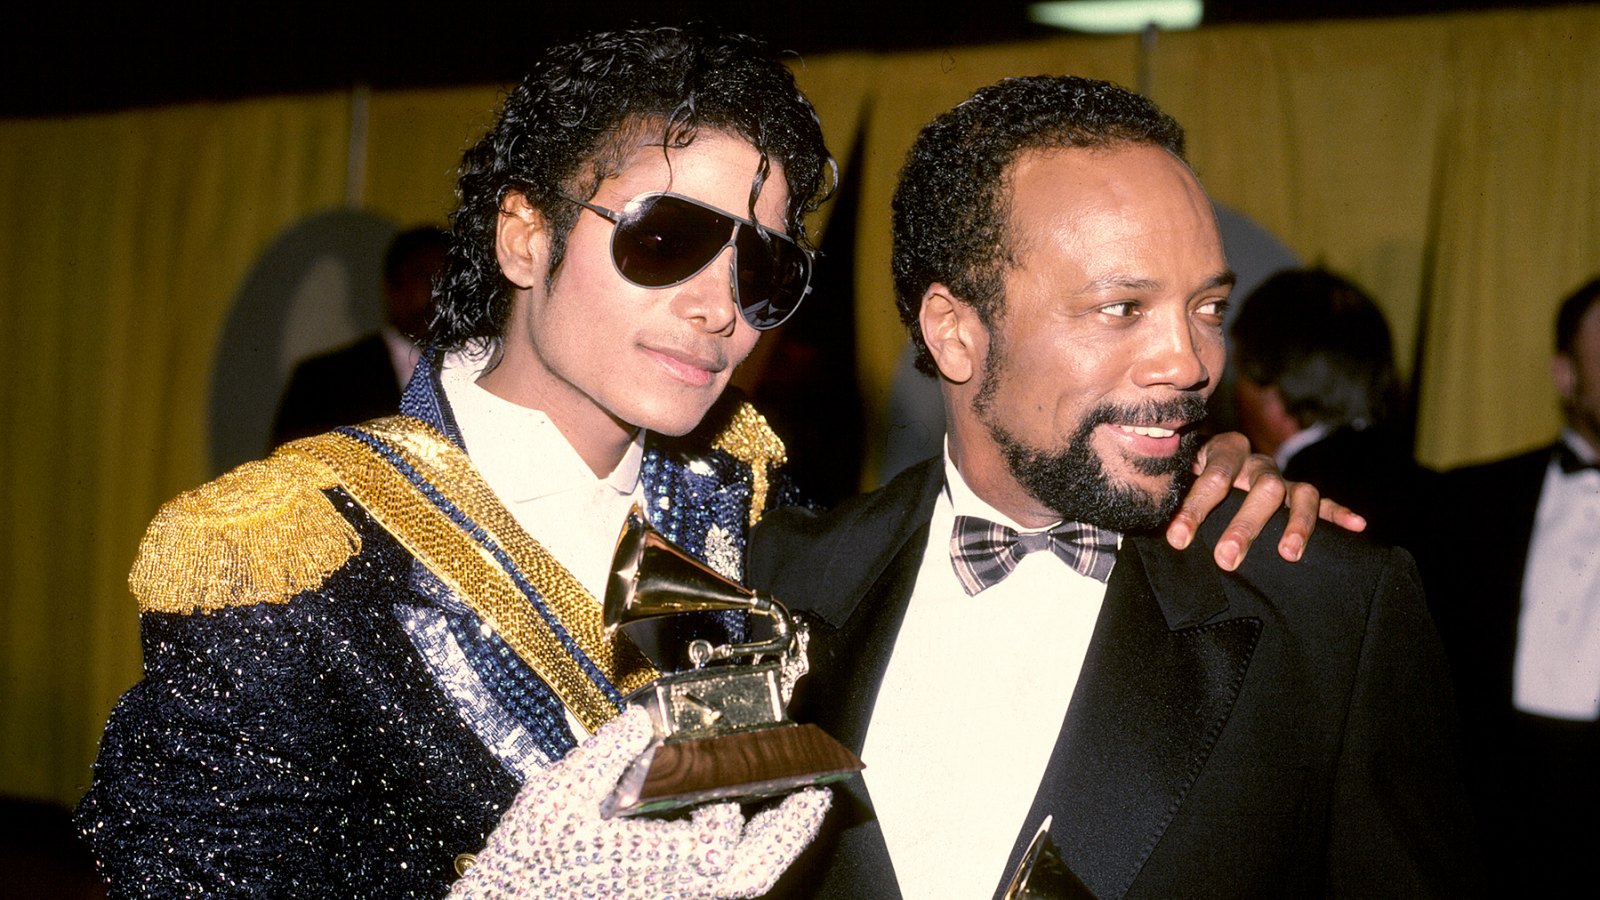 Michael Jackson with Quincy Jones at the 1984 Grammy Awards.